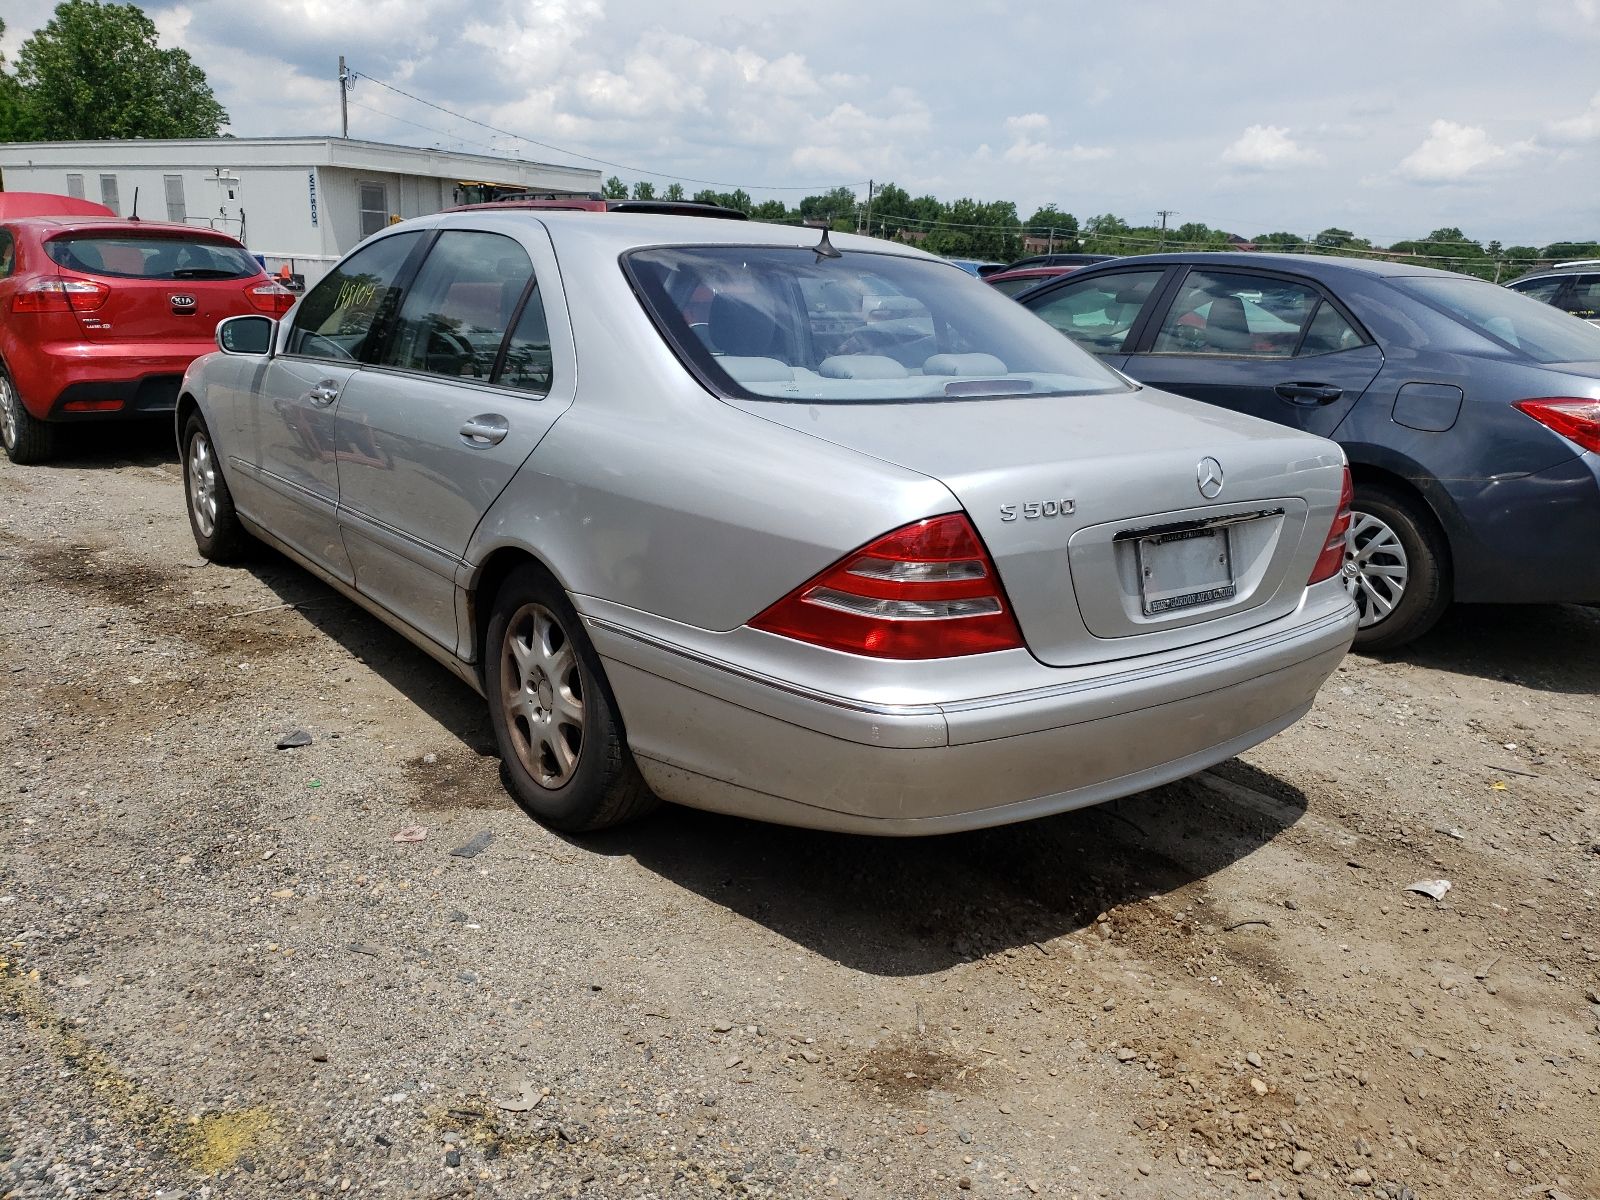 3 of WDBNG75J61A164987 Mercedes-Benz S-Class 2001